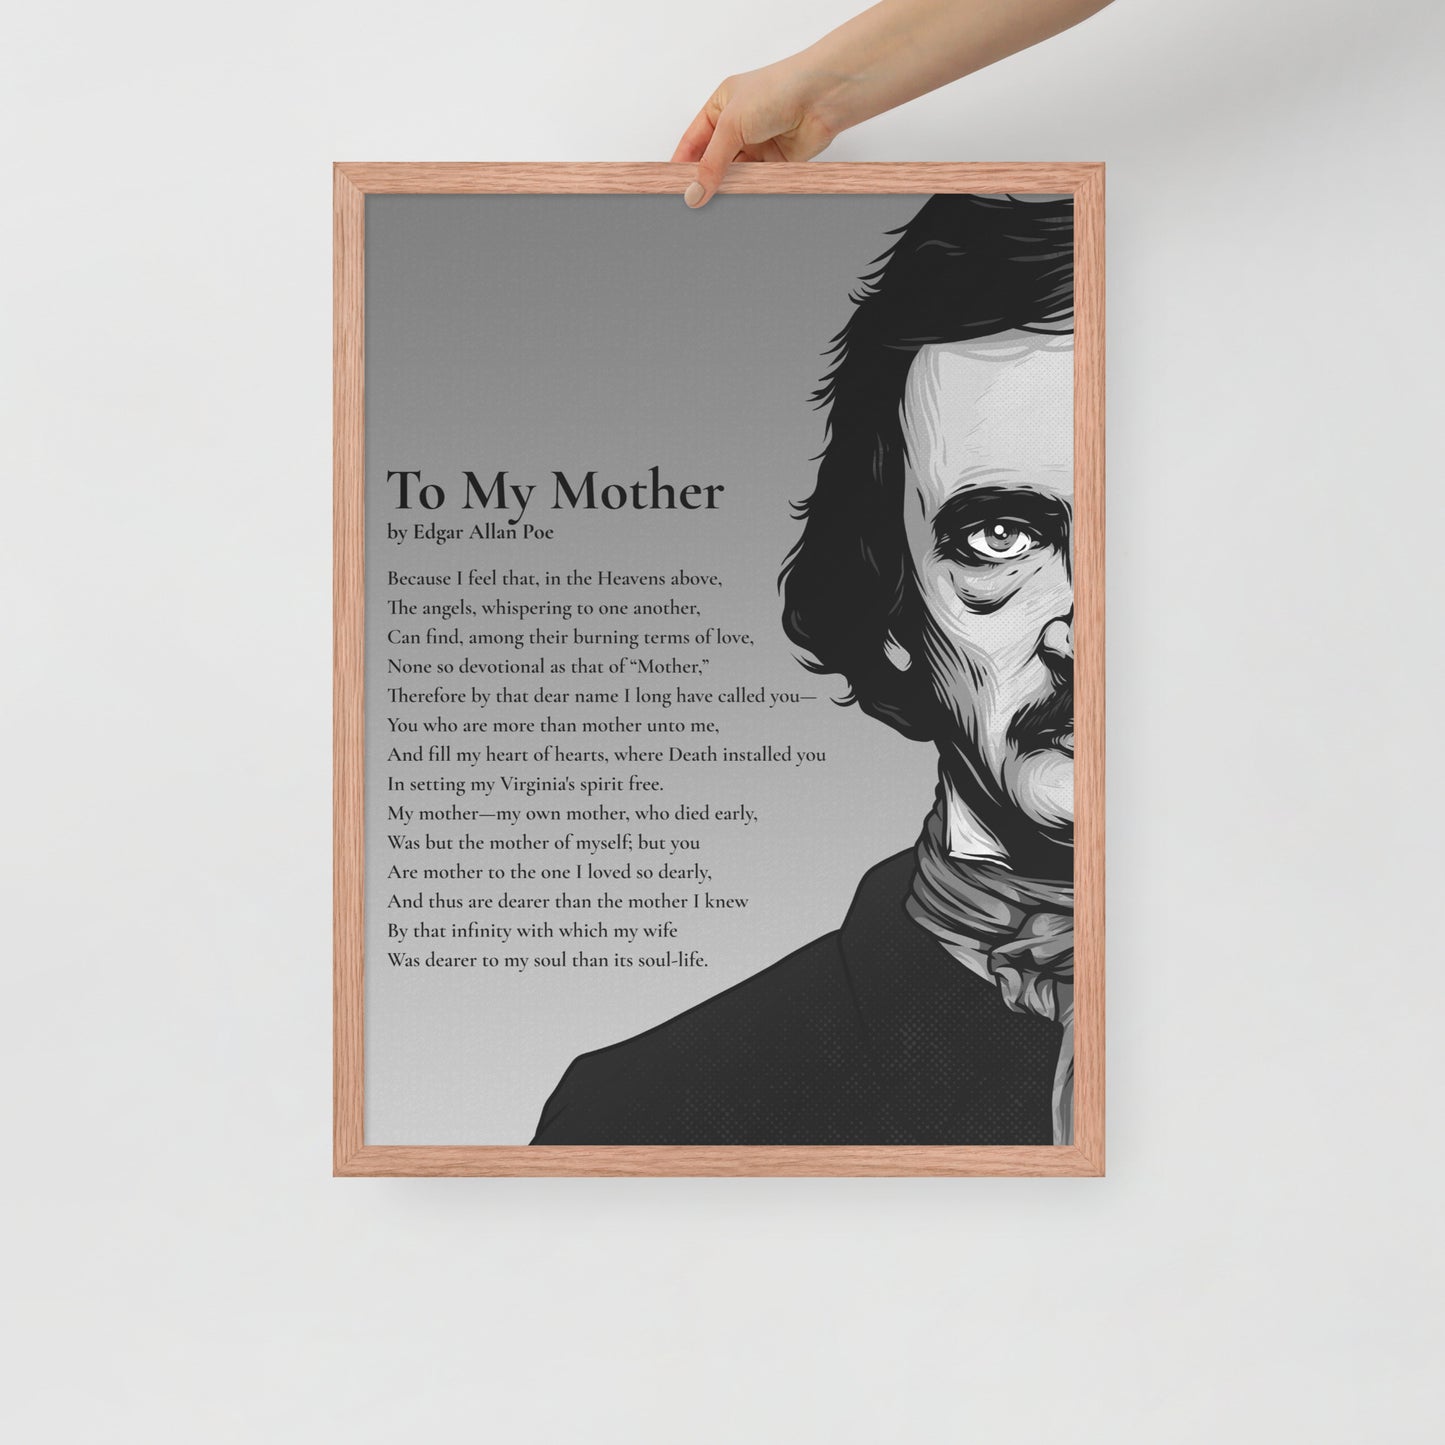 Edgar Allan Poe's 'To My Mother' Framed Matted Poster - 18 x 24 Red Oak Frame